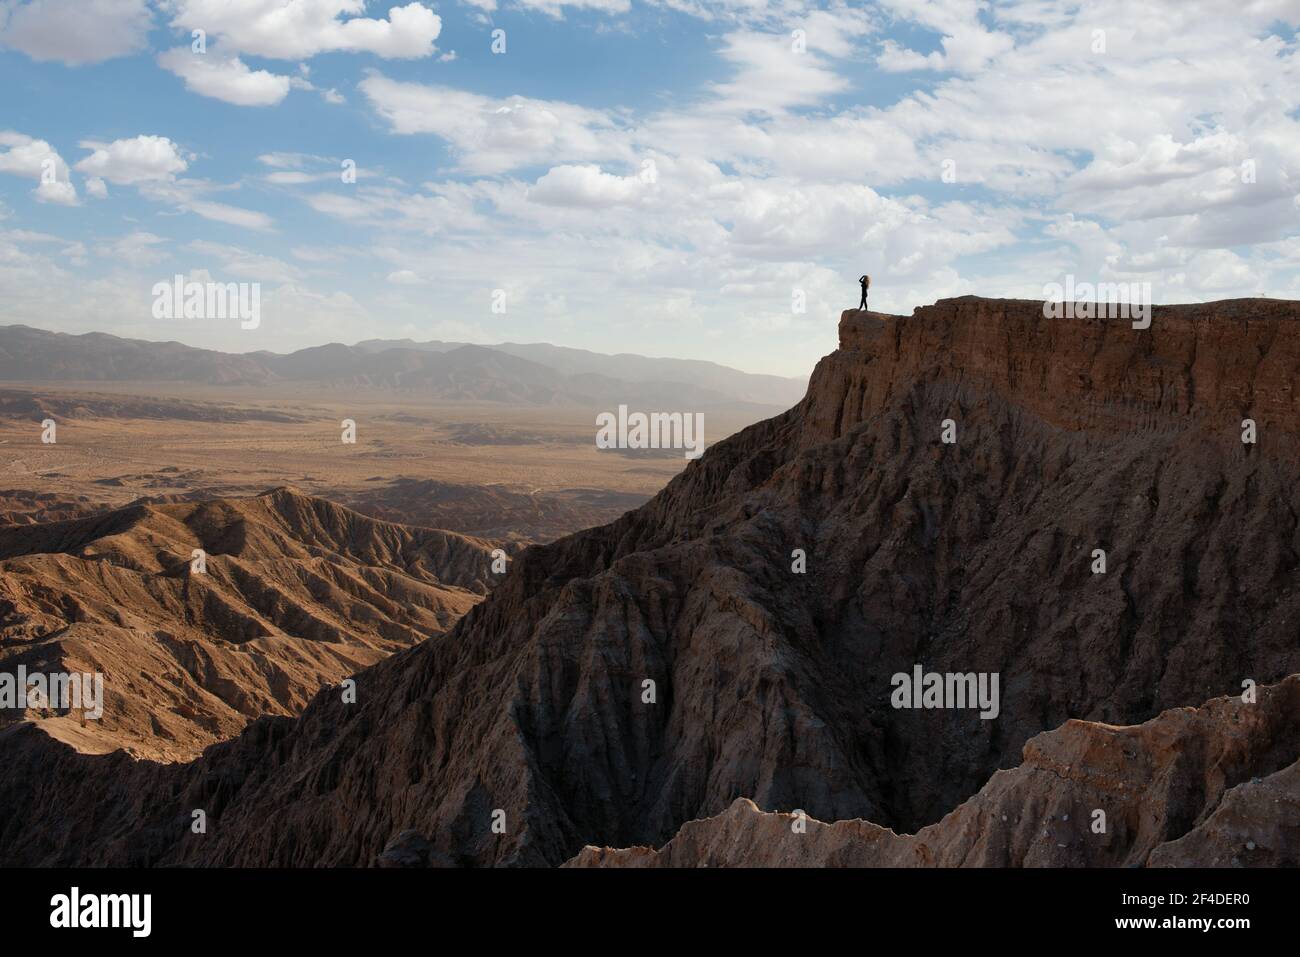 Woman standing on mountain looking at badlands mountain view, Anza Borrego Desert State Park, California, USA Stock Photo